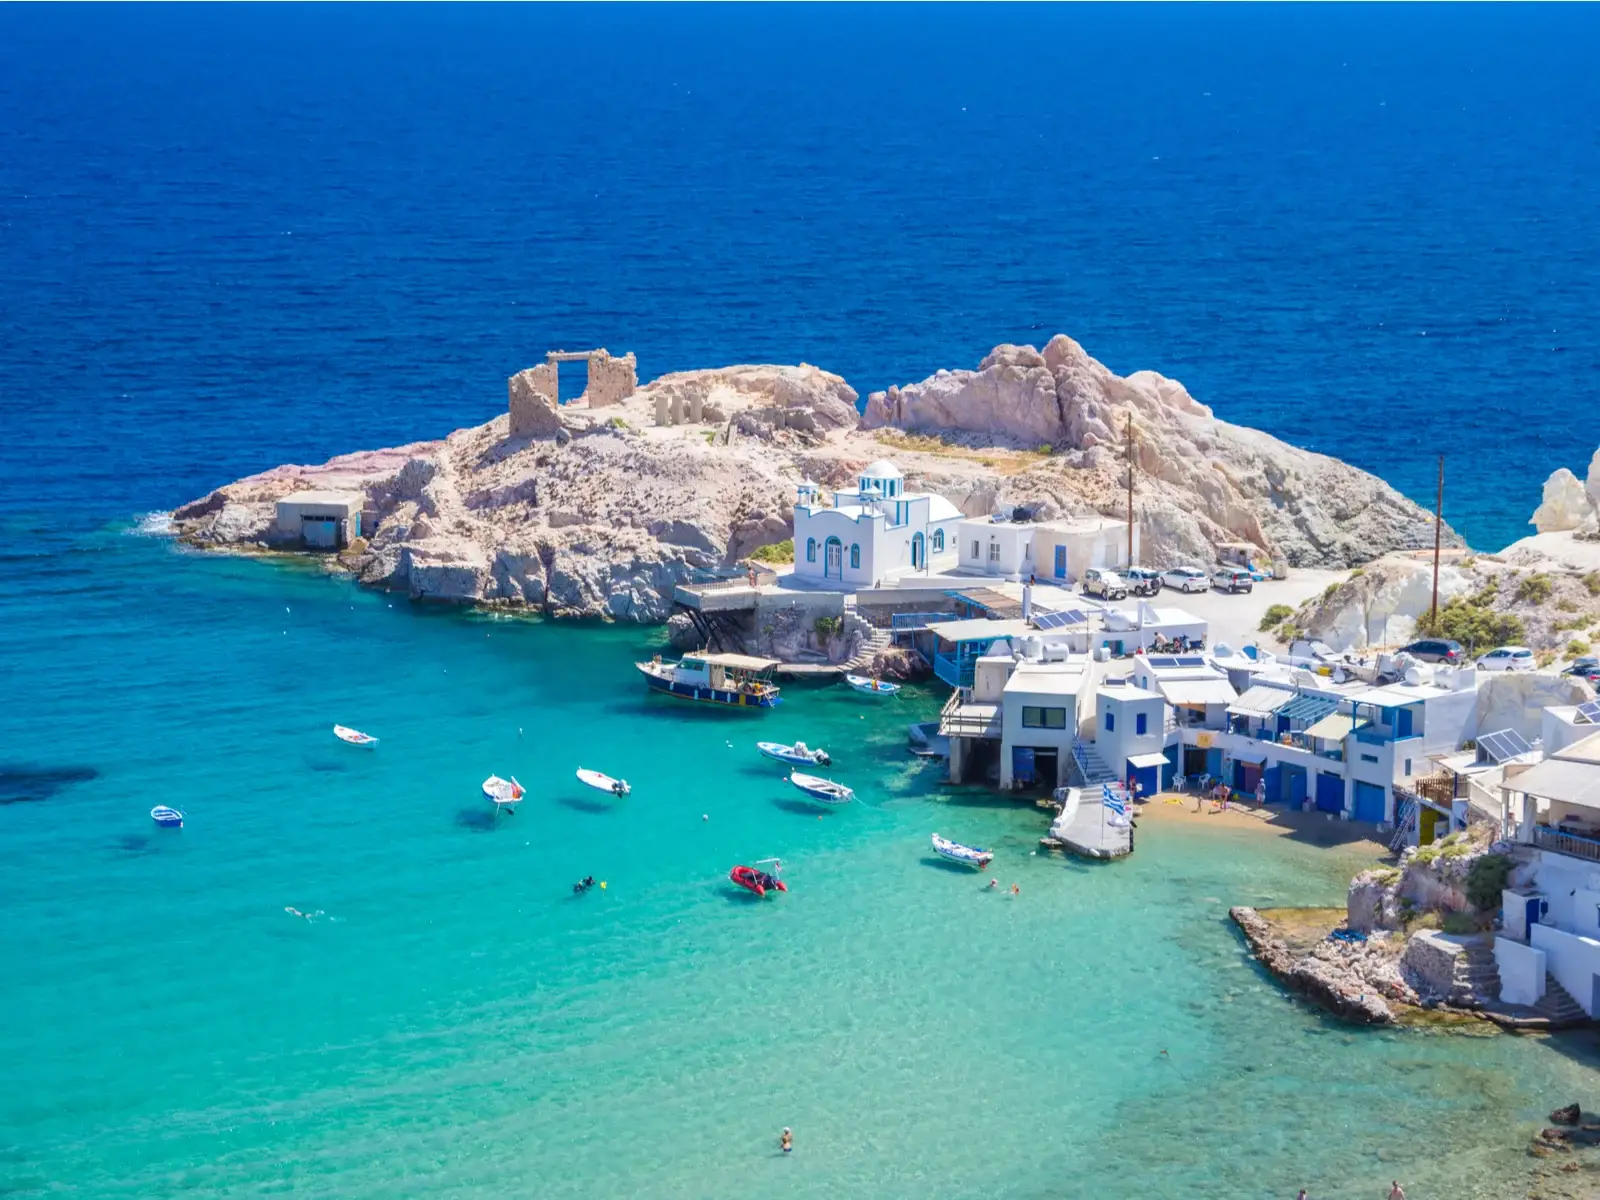 Aerial view of Firopotamos Village at Milos Island, a piece on the best islands in Greece to visit, where seen traditional fishermen's houses erected near at its coast and small fishing boats floating on crystal clear waters